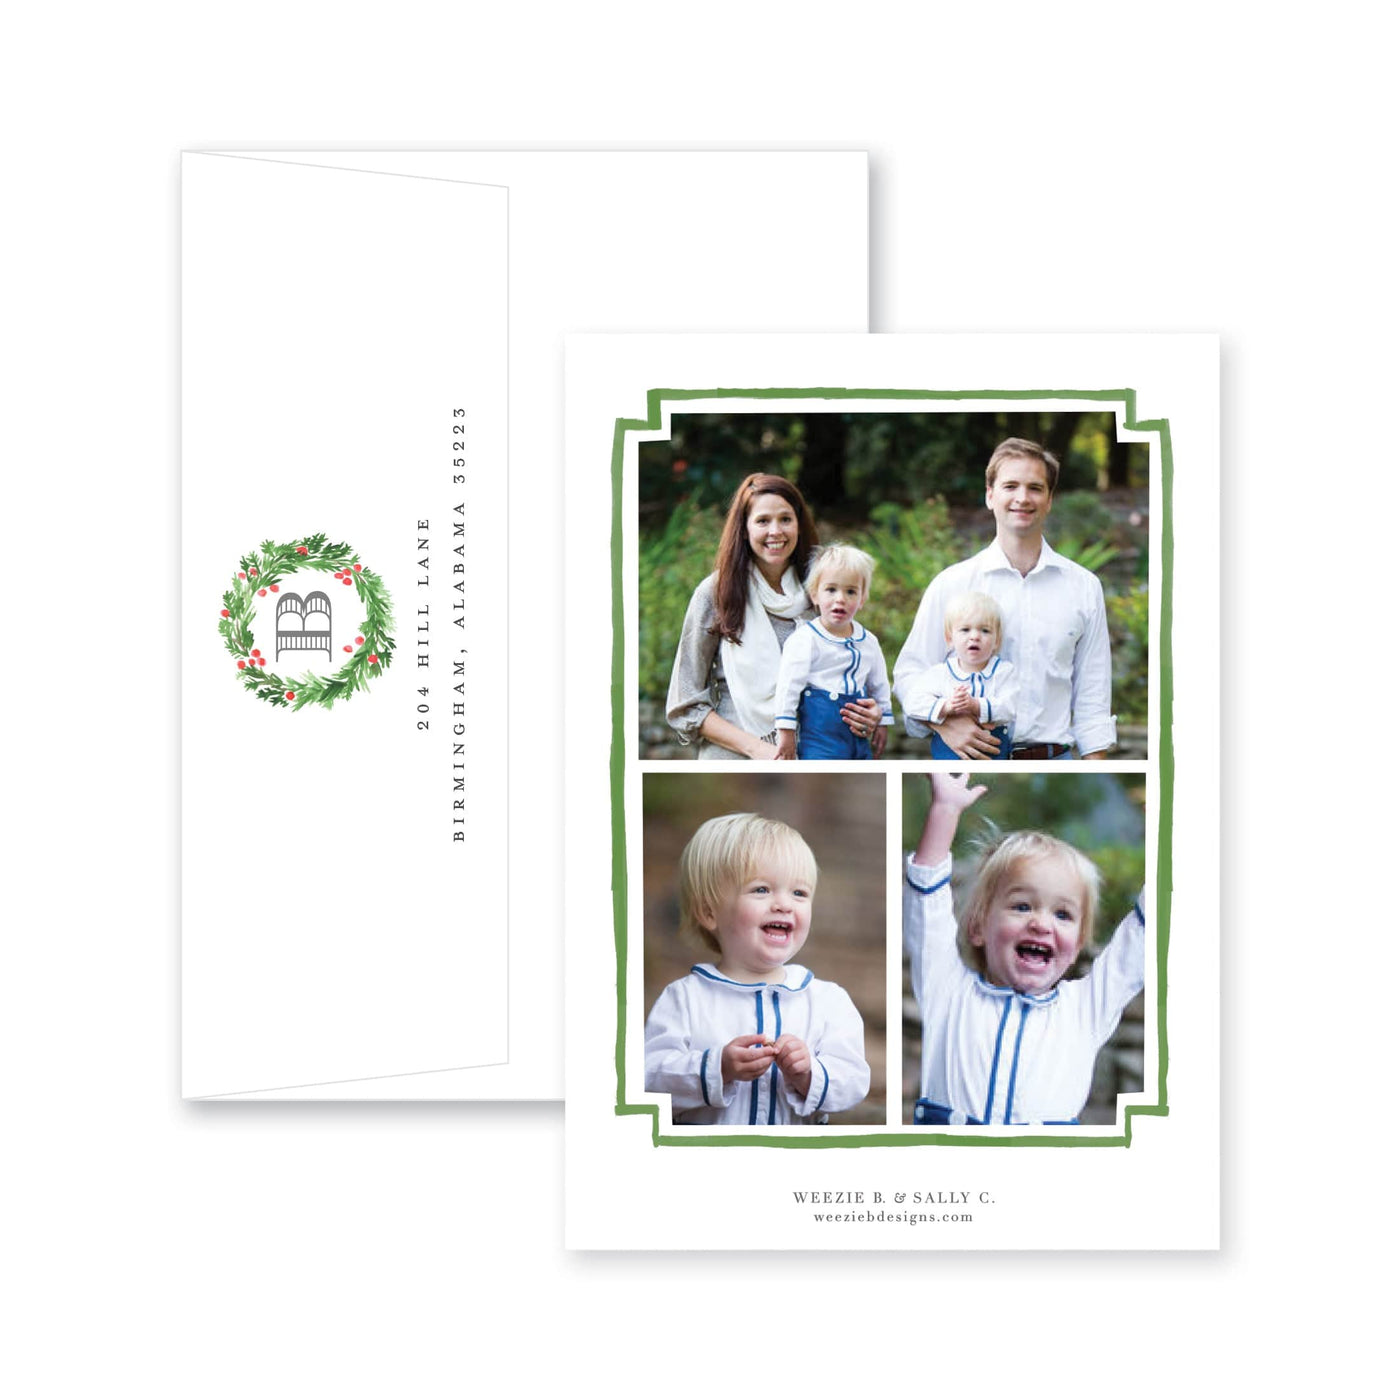 Evergreen Wreath with Berries Christmas Card